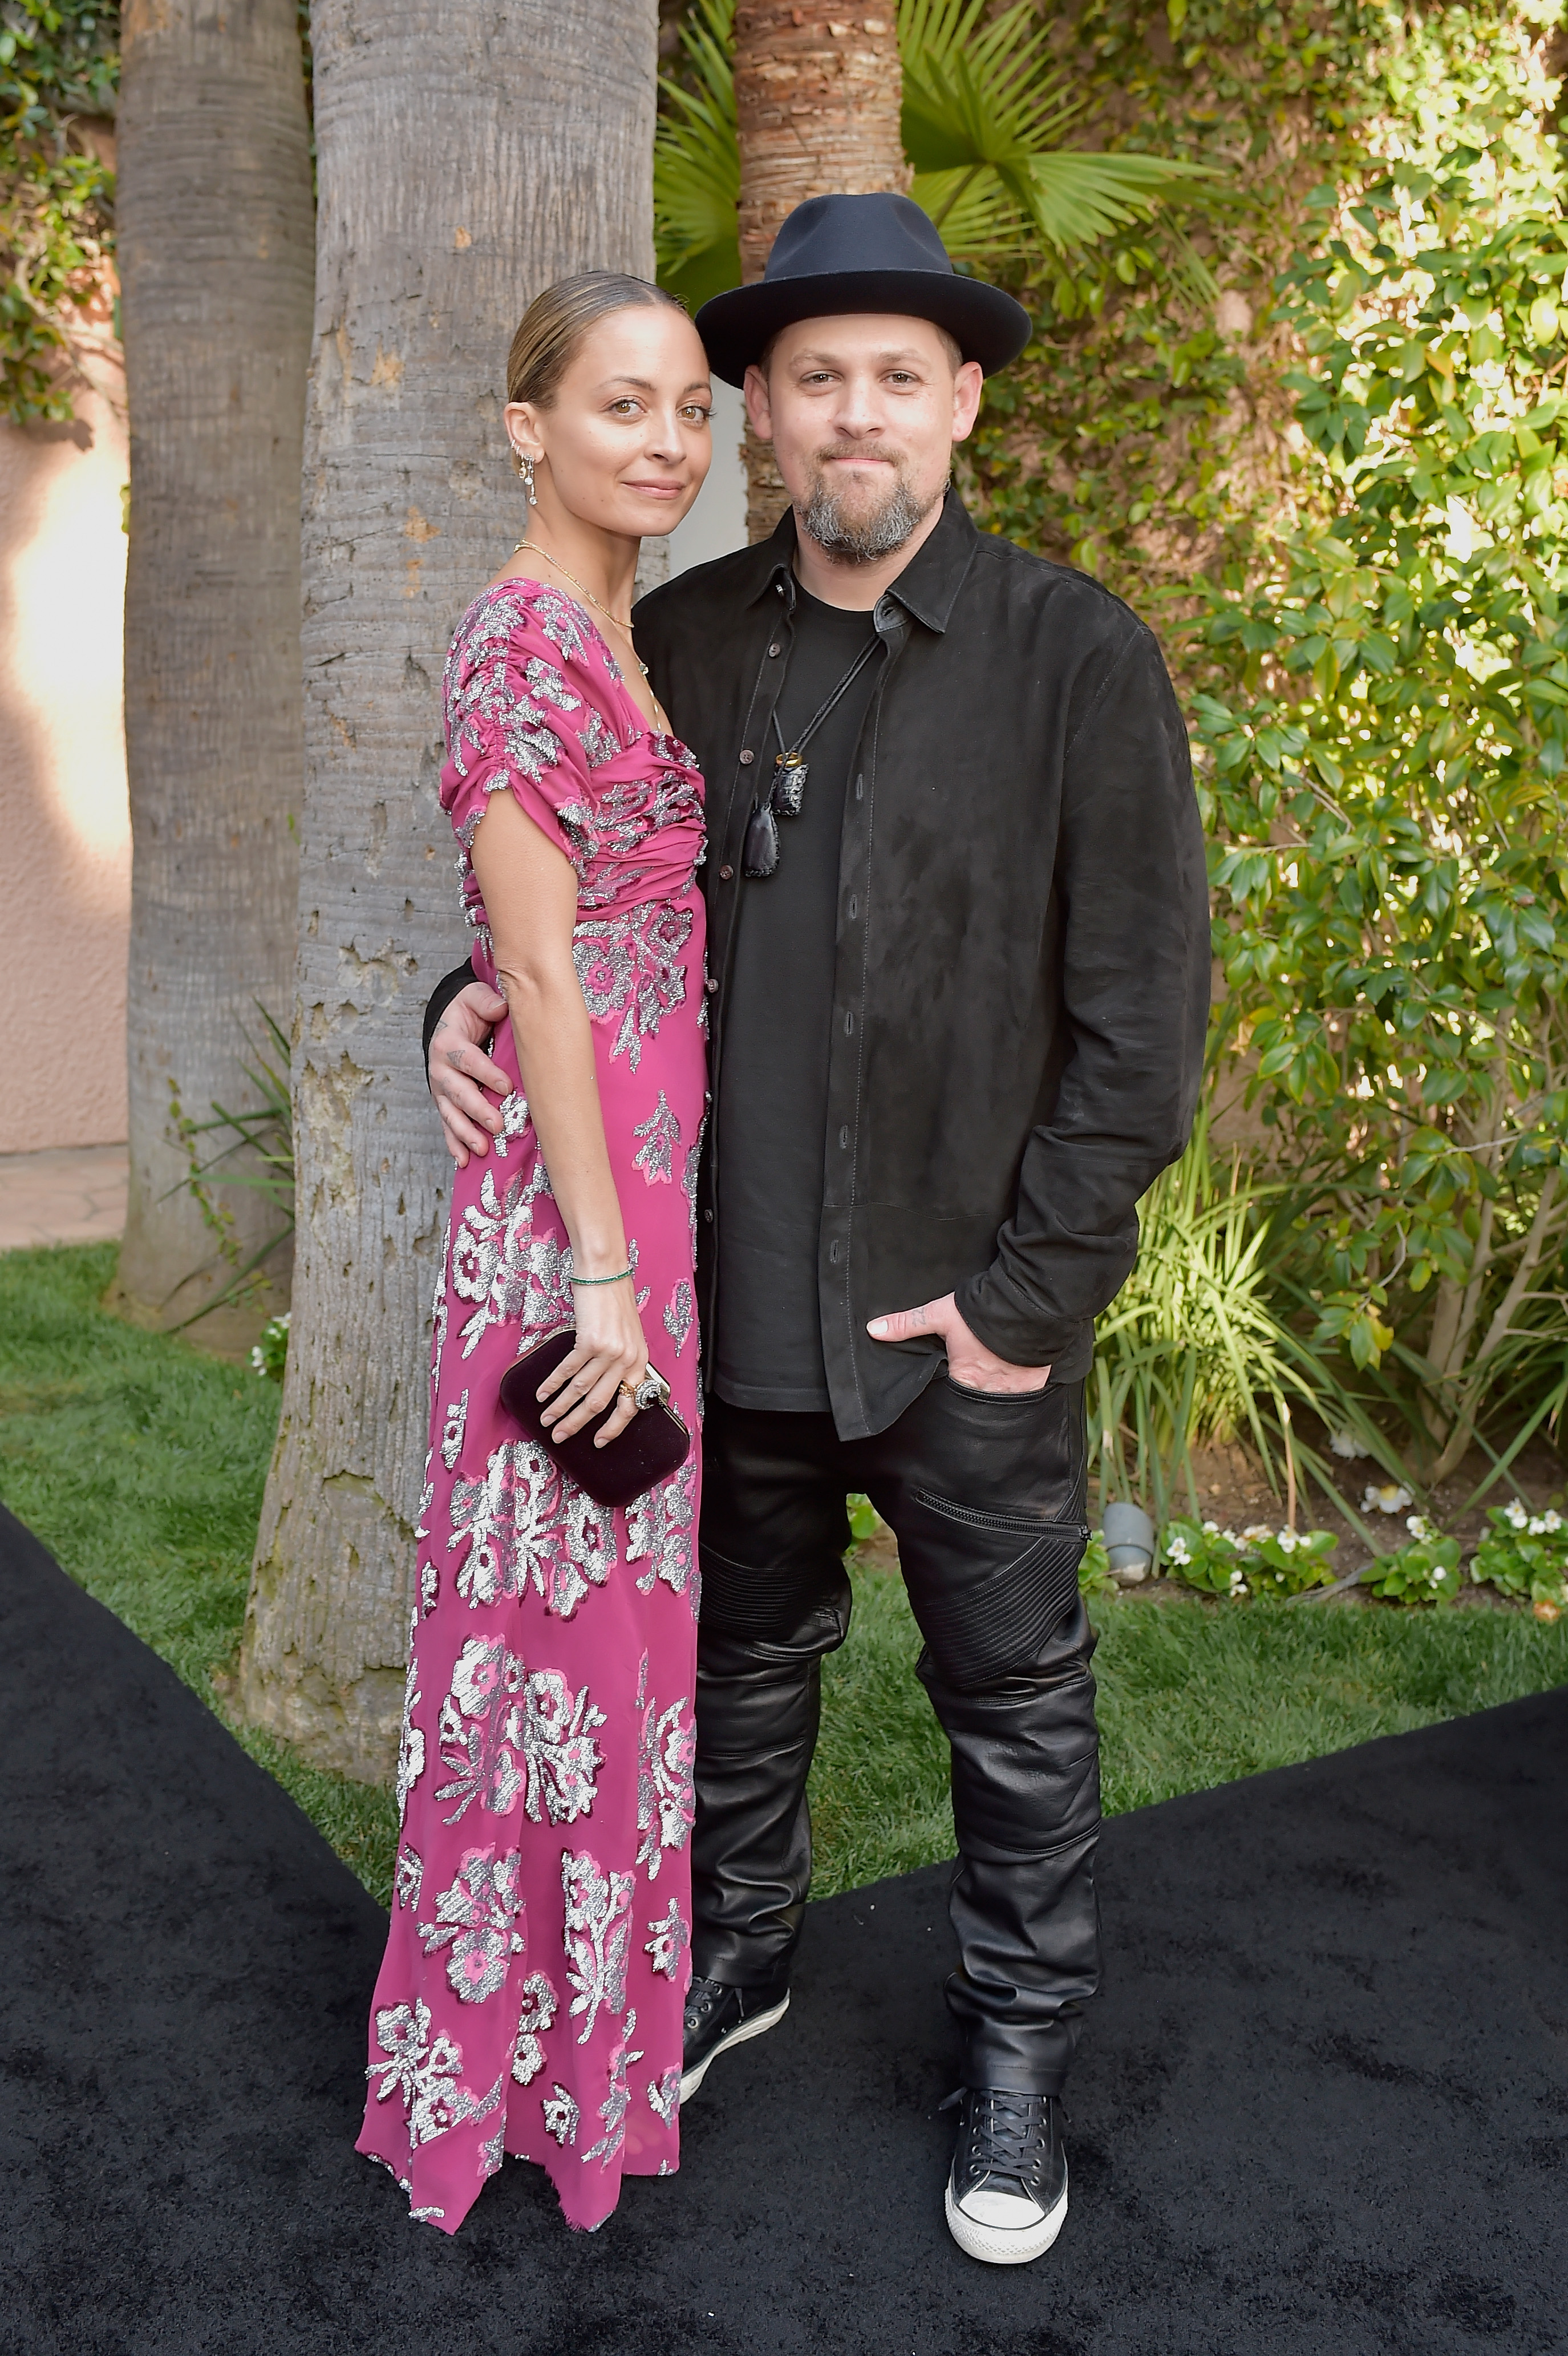 Nicole Richie and Joel Madden at the 4th Annual Fashion Los Angeles Awards | Source: Getty Images